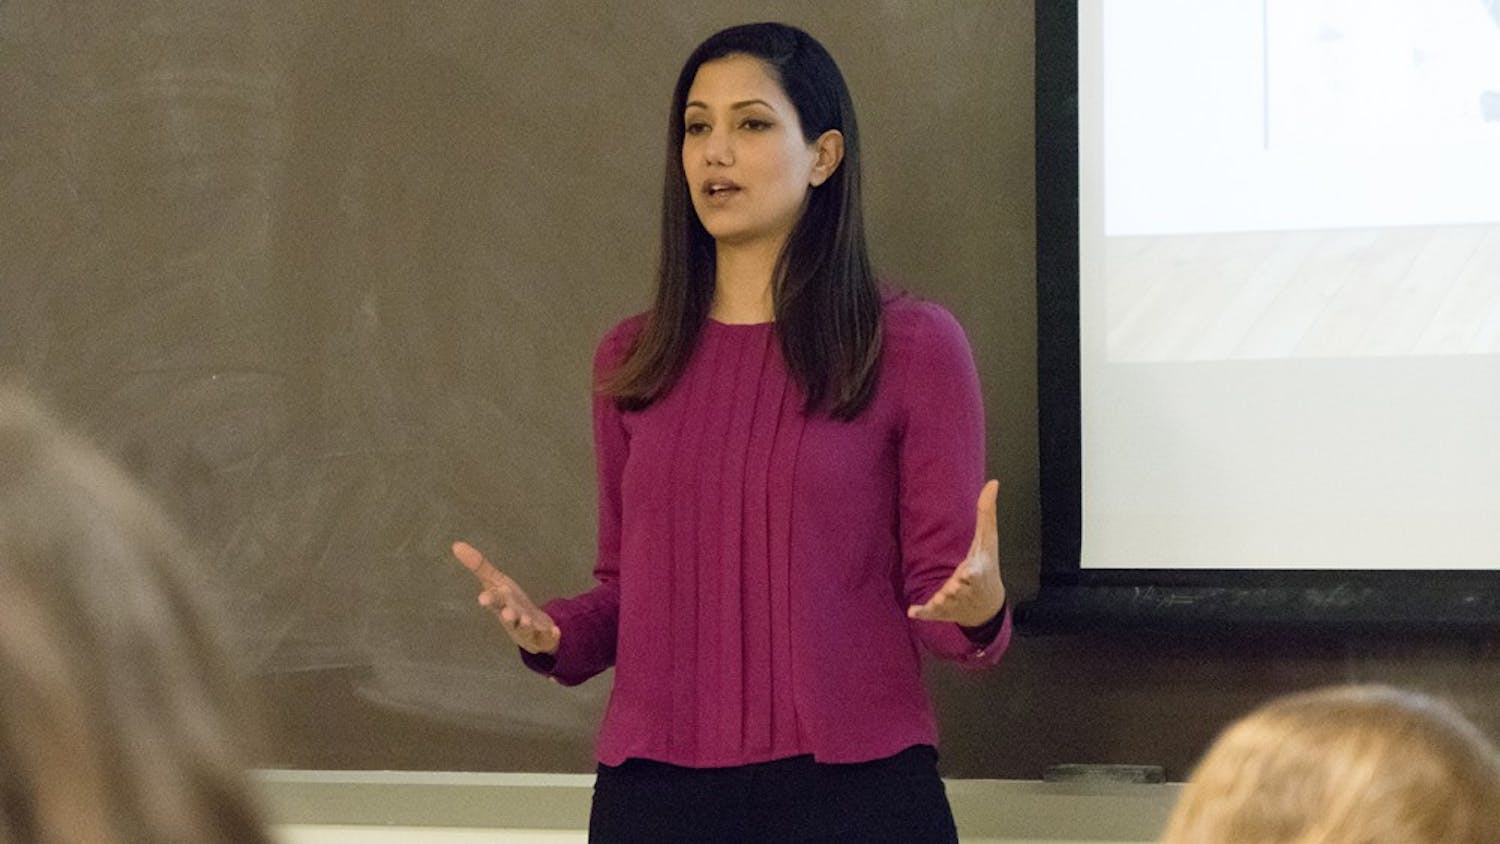 Former IDF soldier Lital shares her life story at Woodburn Hall on Monday.  Lital, along with fellow former IDF soldier Mohammed, are touring around America educating young adults on Israel and its people.